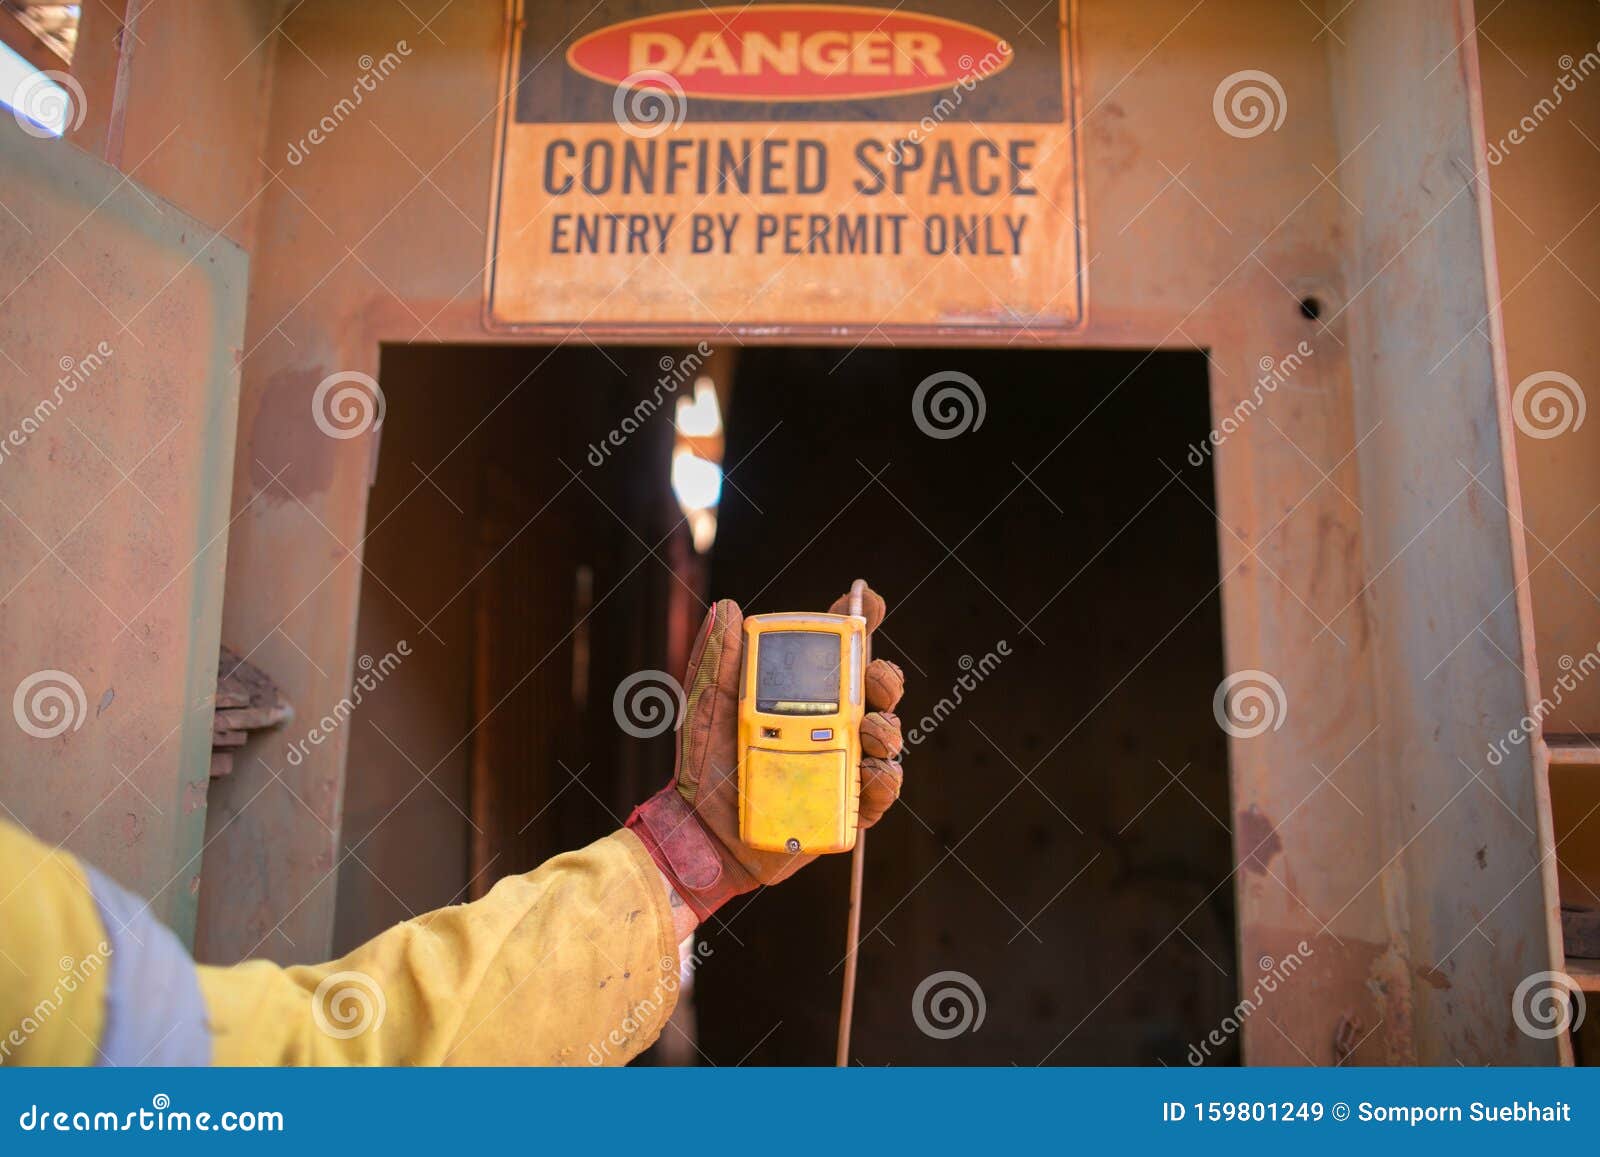 worker hand holding gas test leak detector device at main confined space entry and exit